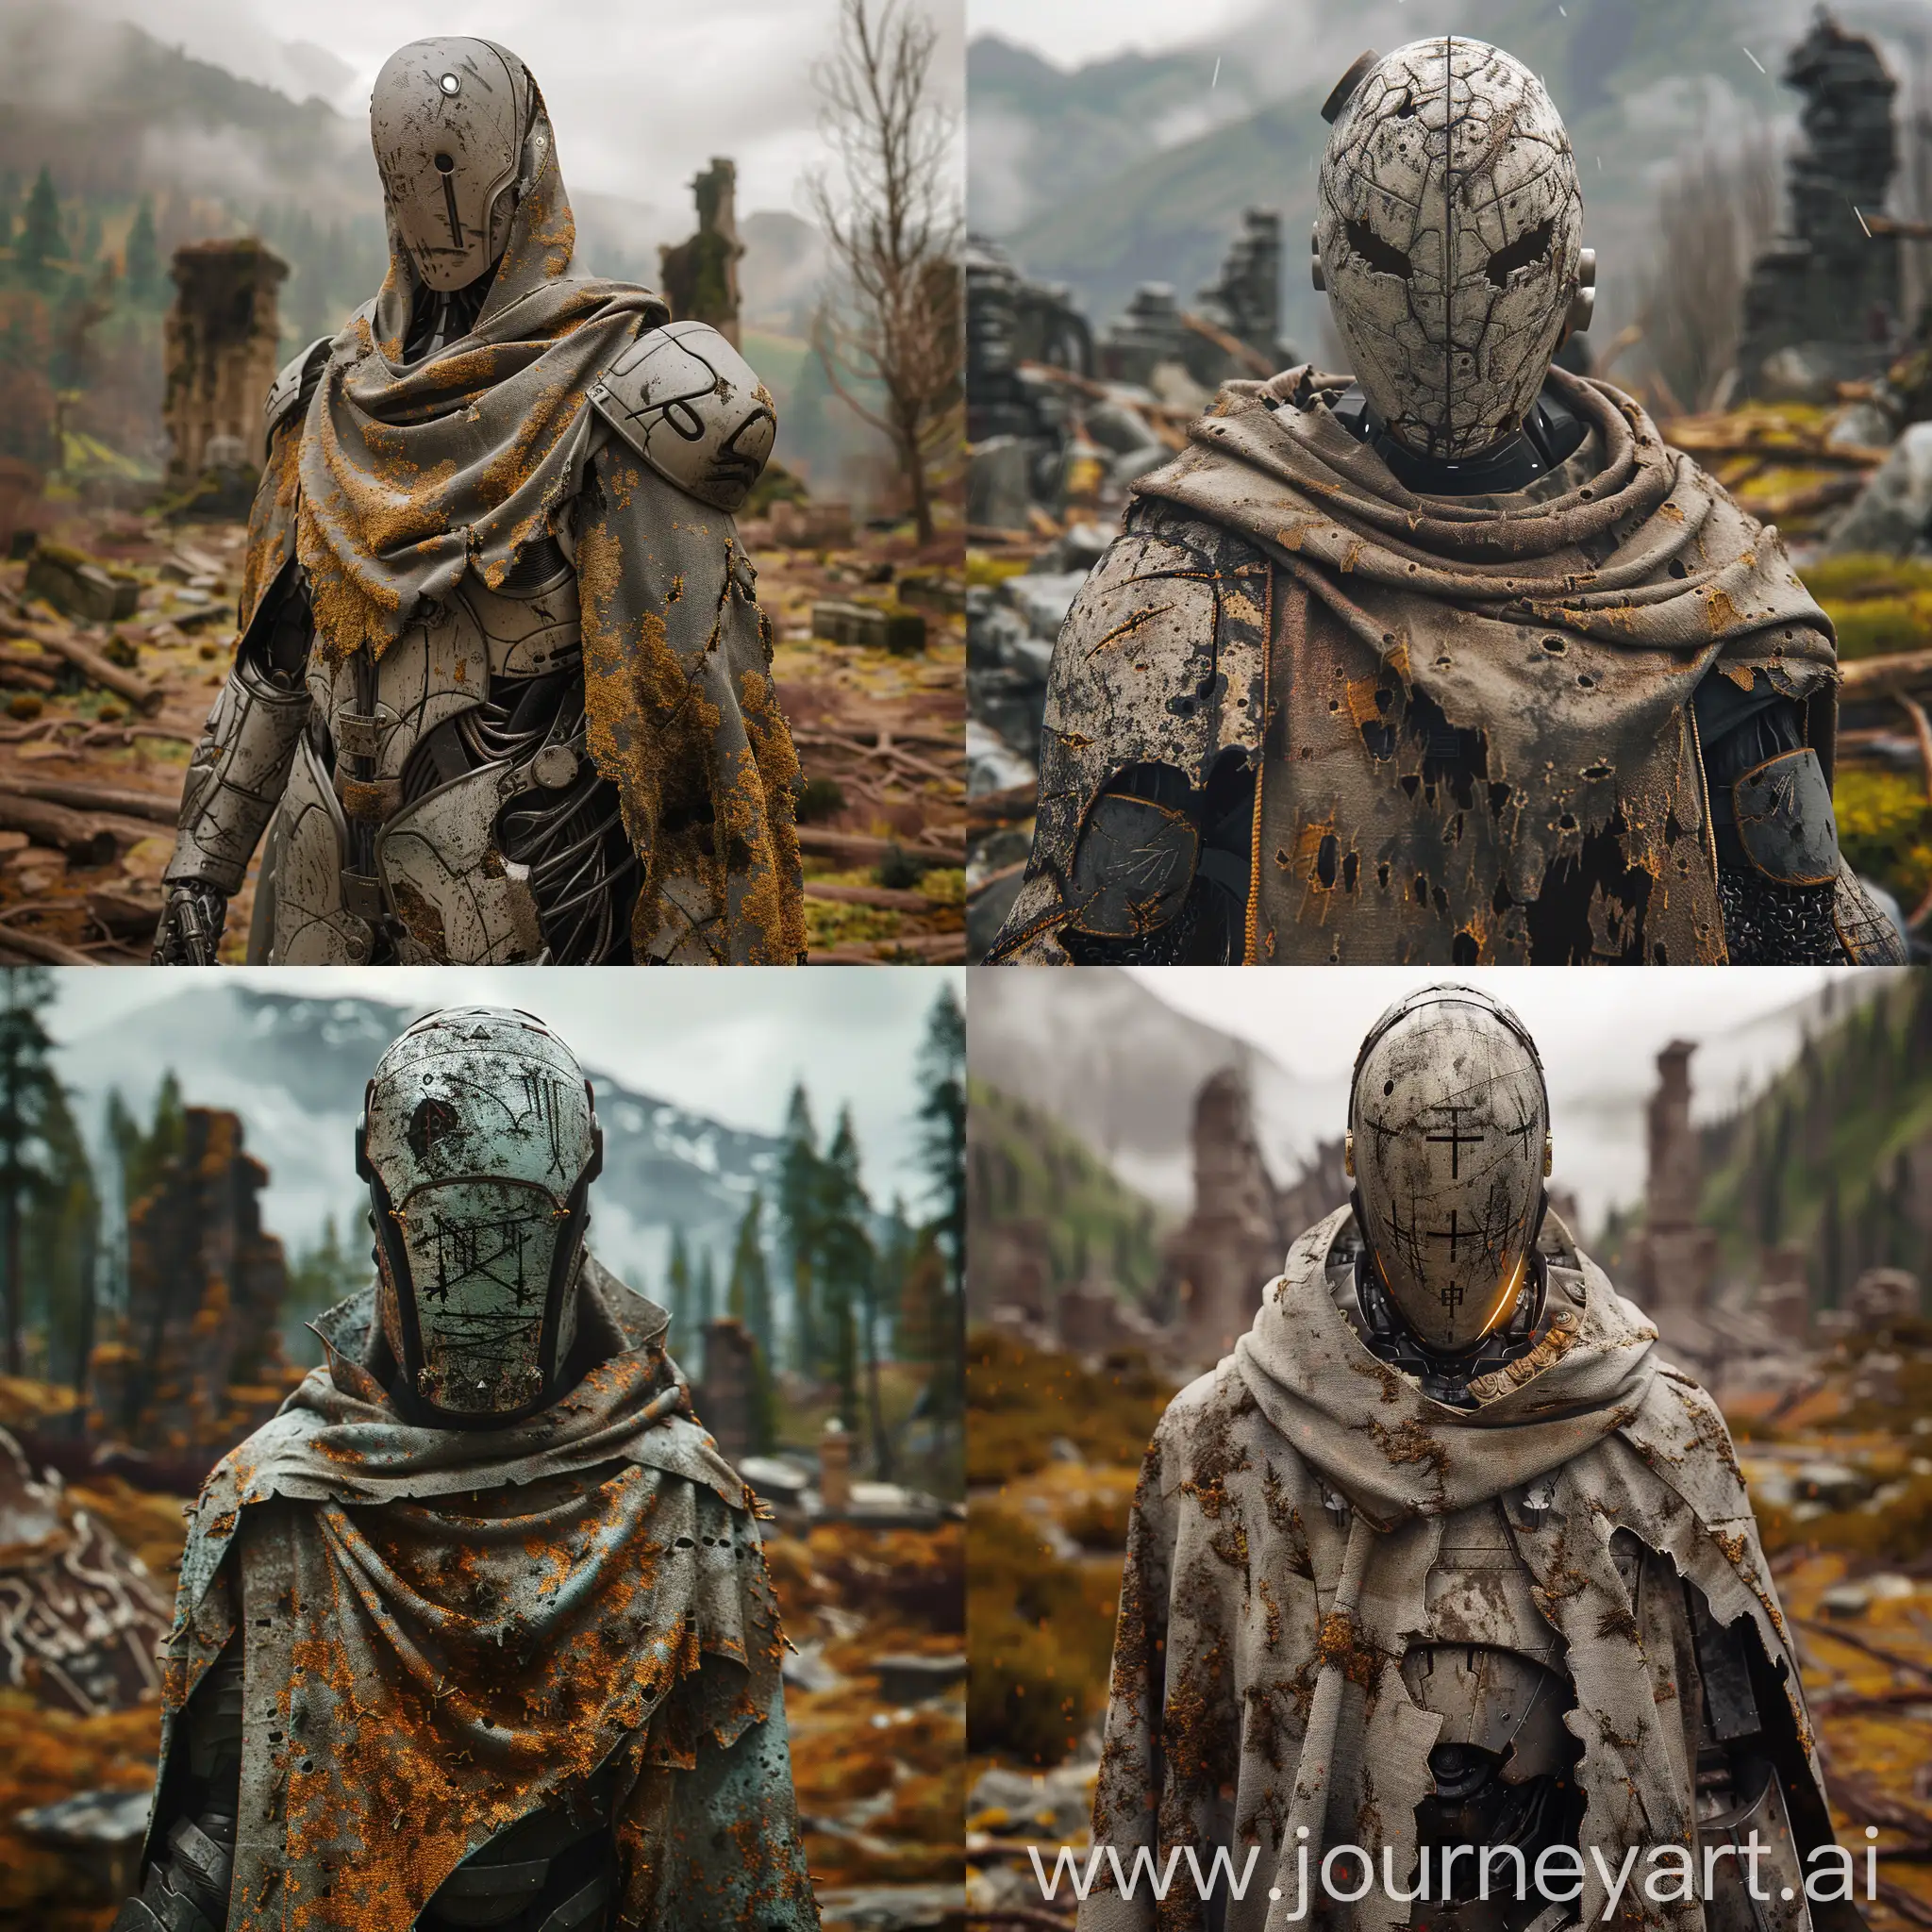 Masterpiece, 4k, unreal engine m5, volumetric lighting, dof, bokeh, hyper realism, adof, vignette, dust, moss, aged, scarred, burnt, runic, holy, magic, scorcerer, mech, robot, 
warforged, dnd, light armour, dark fantasy, fantasy featureless helmet, highly detailed, tattered robes, burnt robes, destroyed land, castle ruins in background, burnt wood, unmarked tombs, mountainous background, dead forest